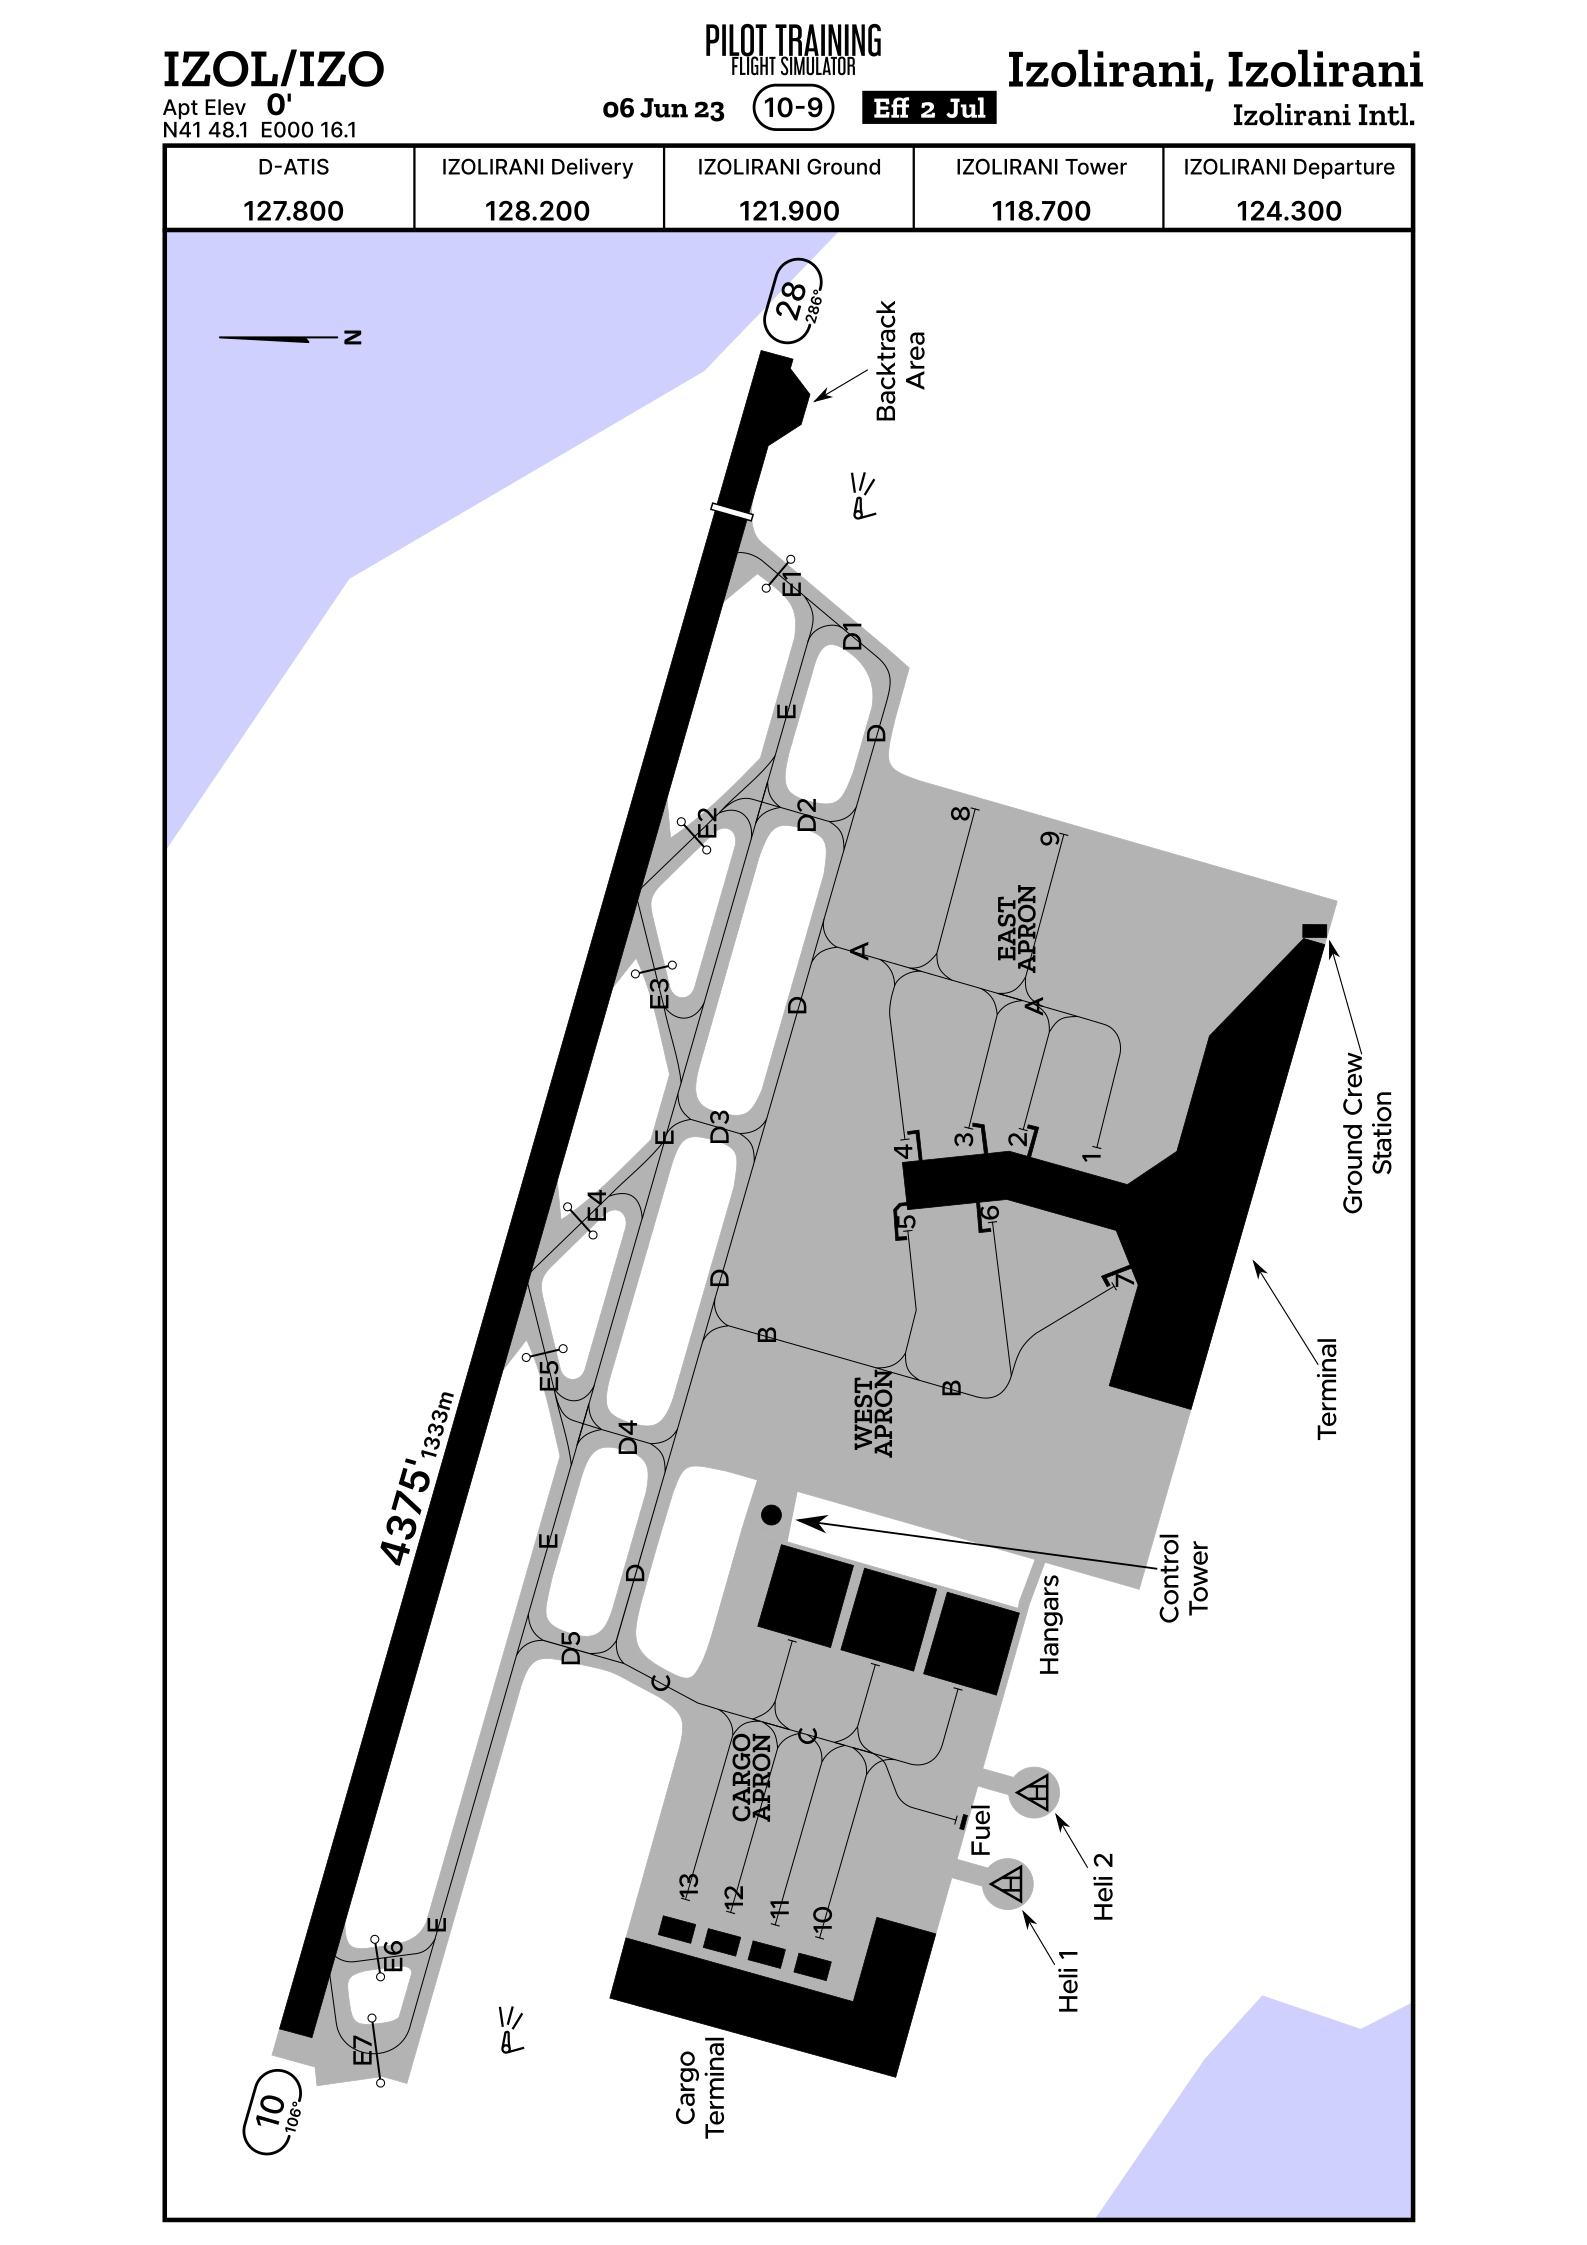 Airport ground chart for the airport IZOL